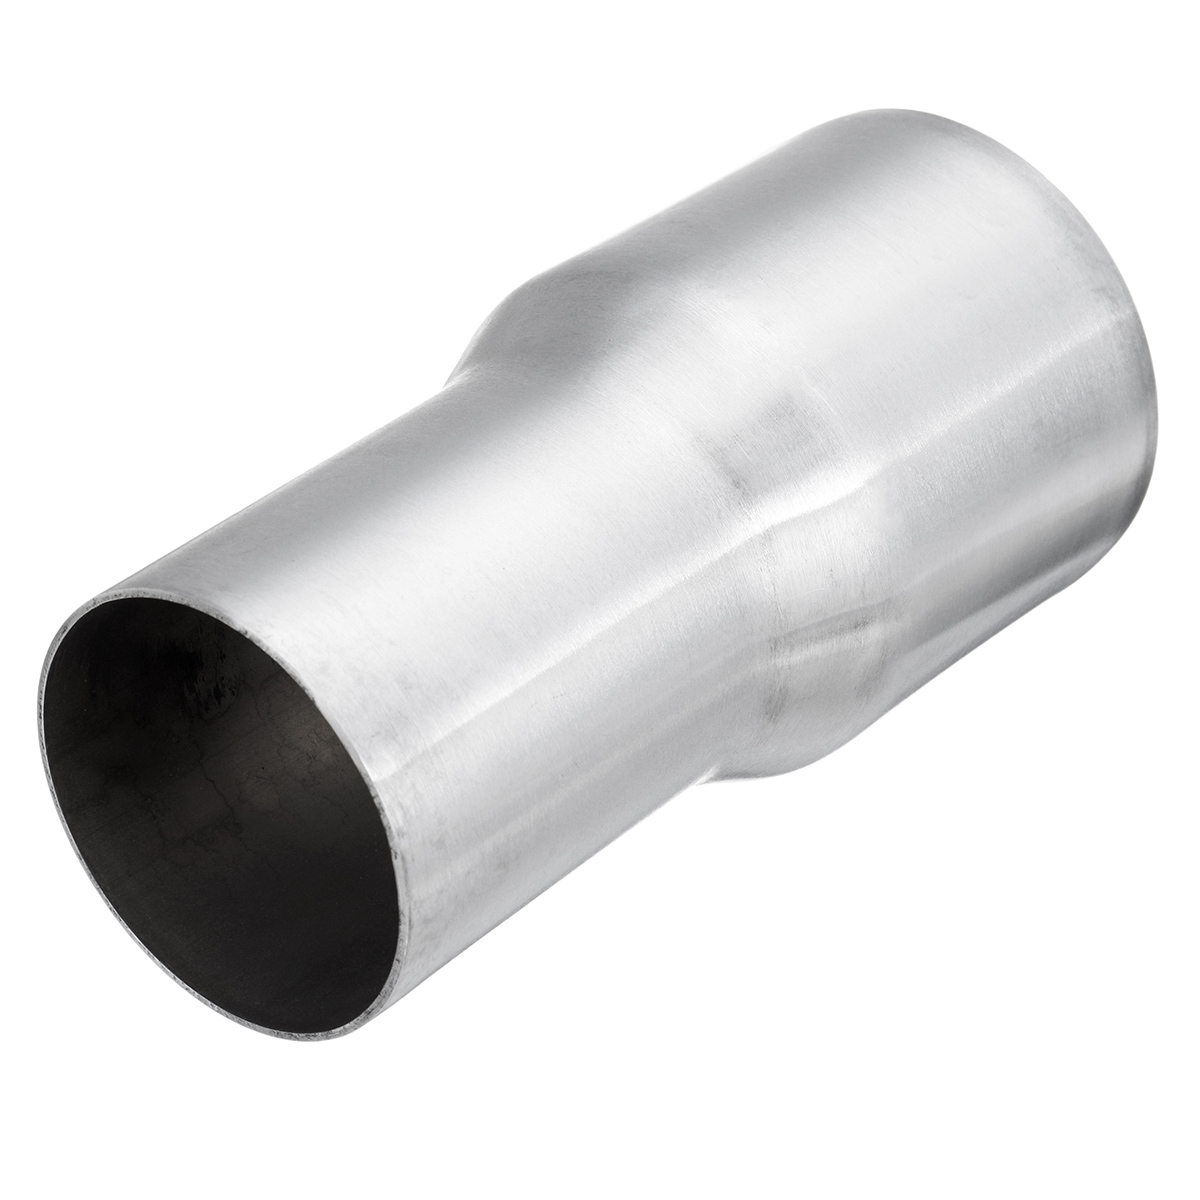 2.5 Inch To 2 Inch Exhaust Reducer Connector Adapter Pipe Tube